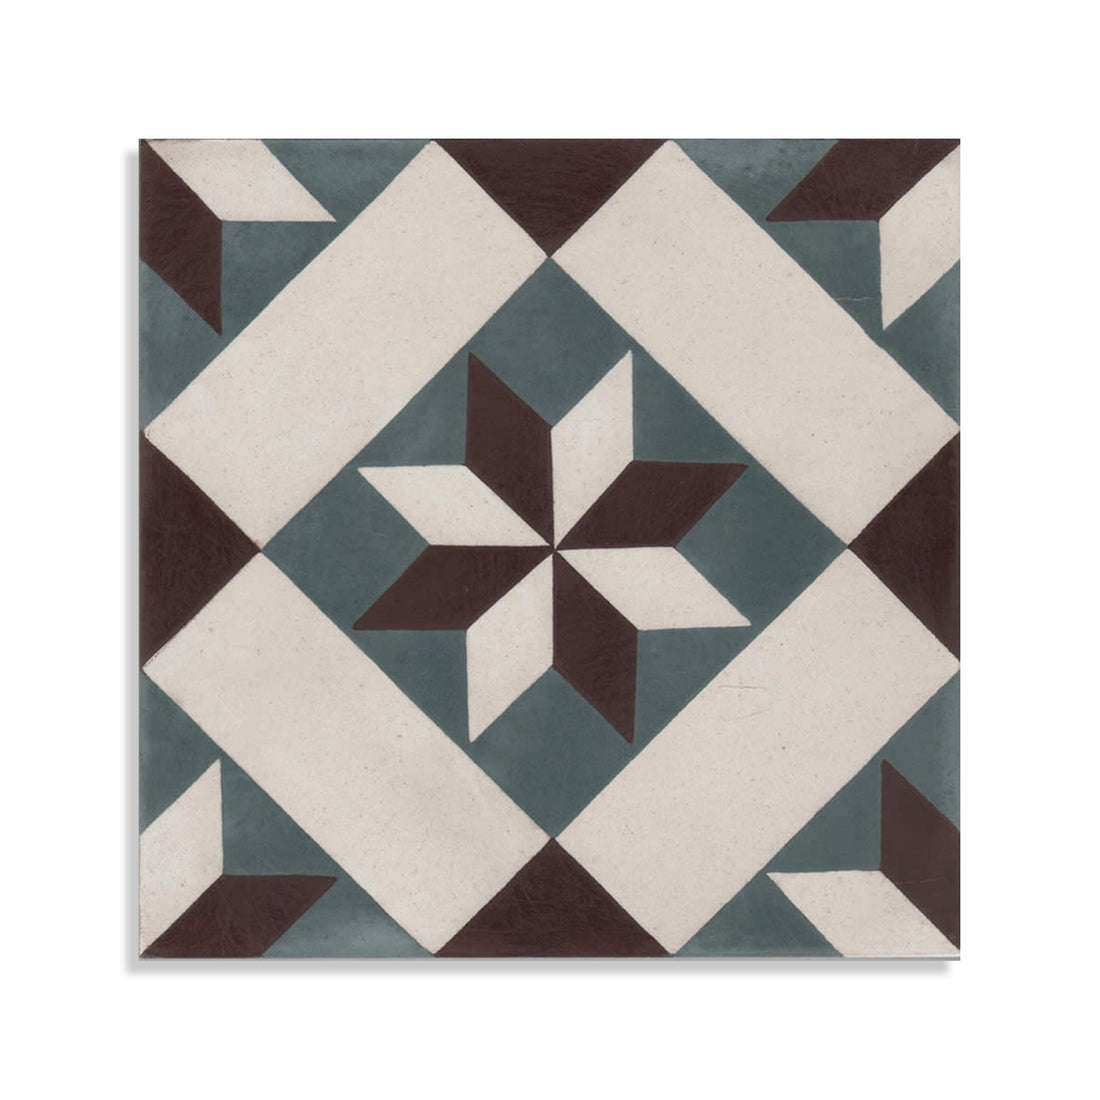 Moroccan Encaustic Cement Pattern 01v, 20 x 20cm - Tiles &amp; Stone To You